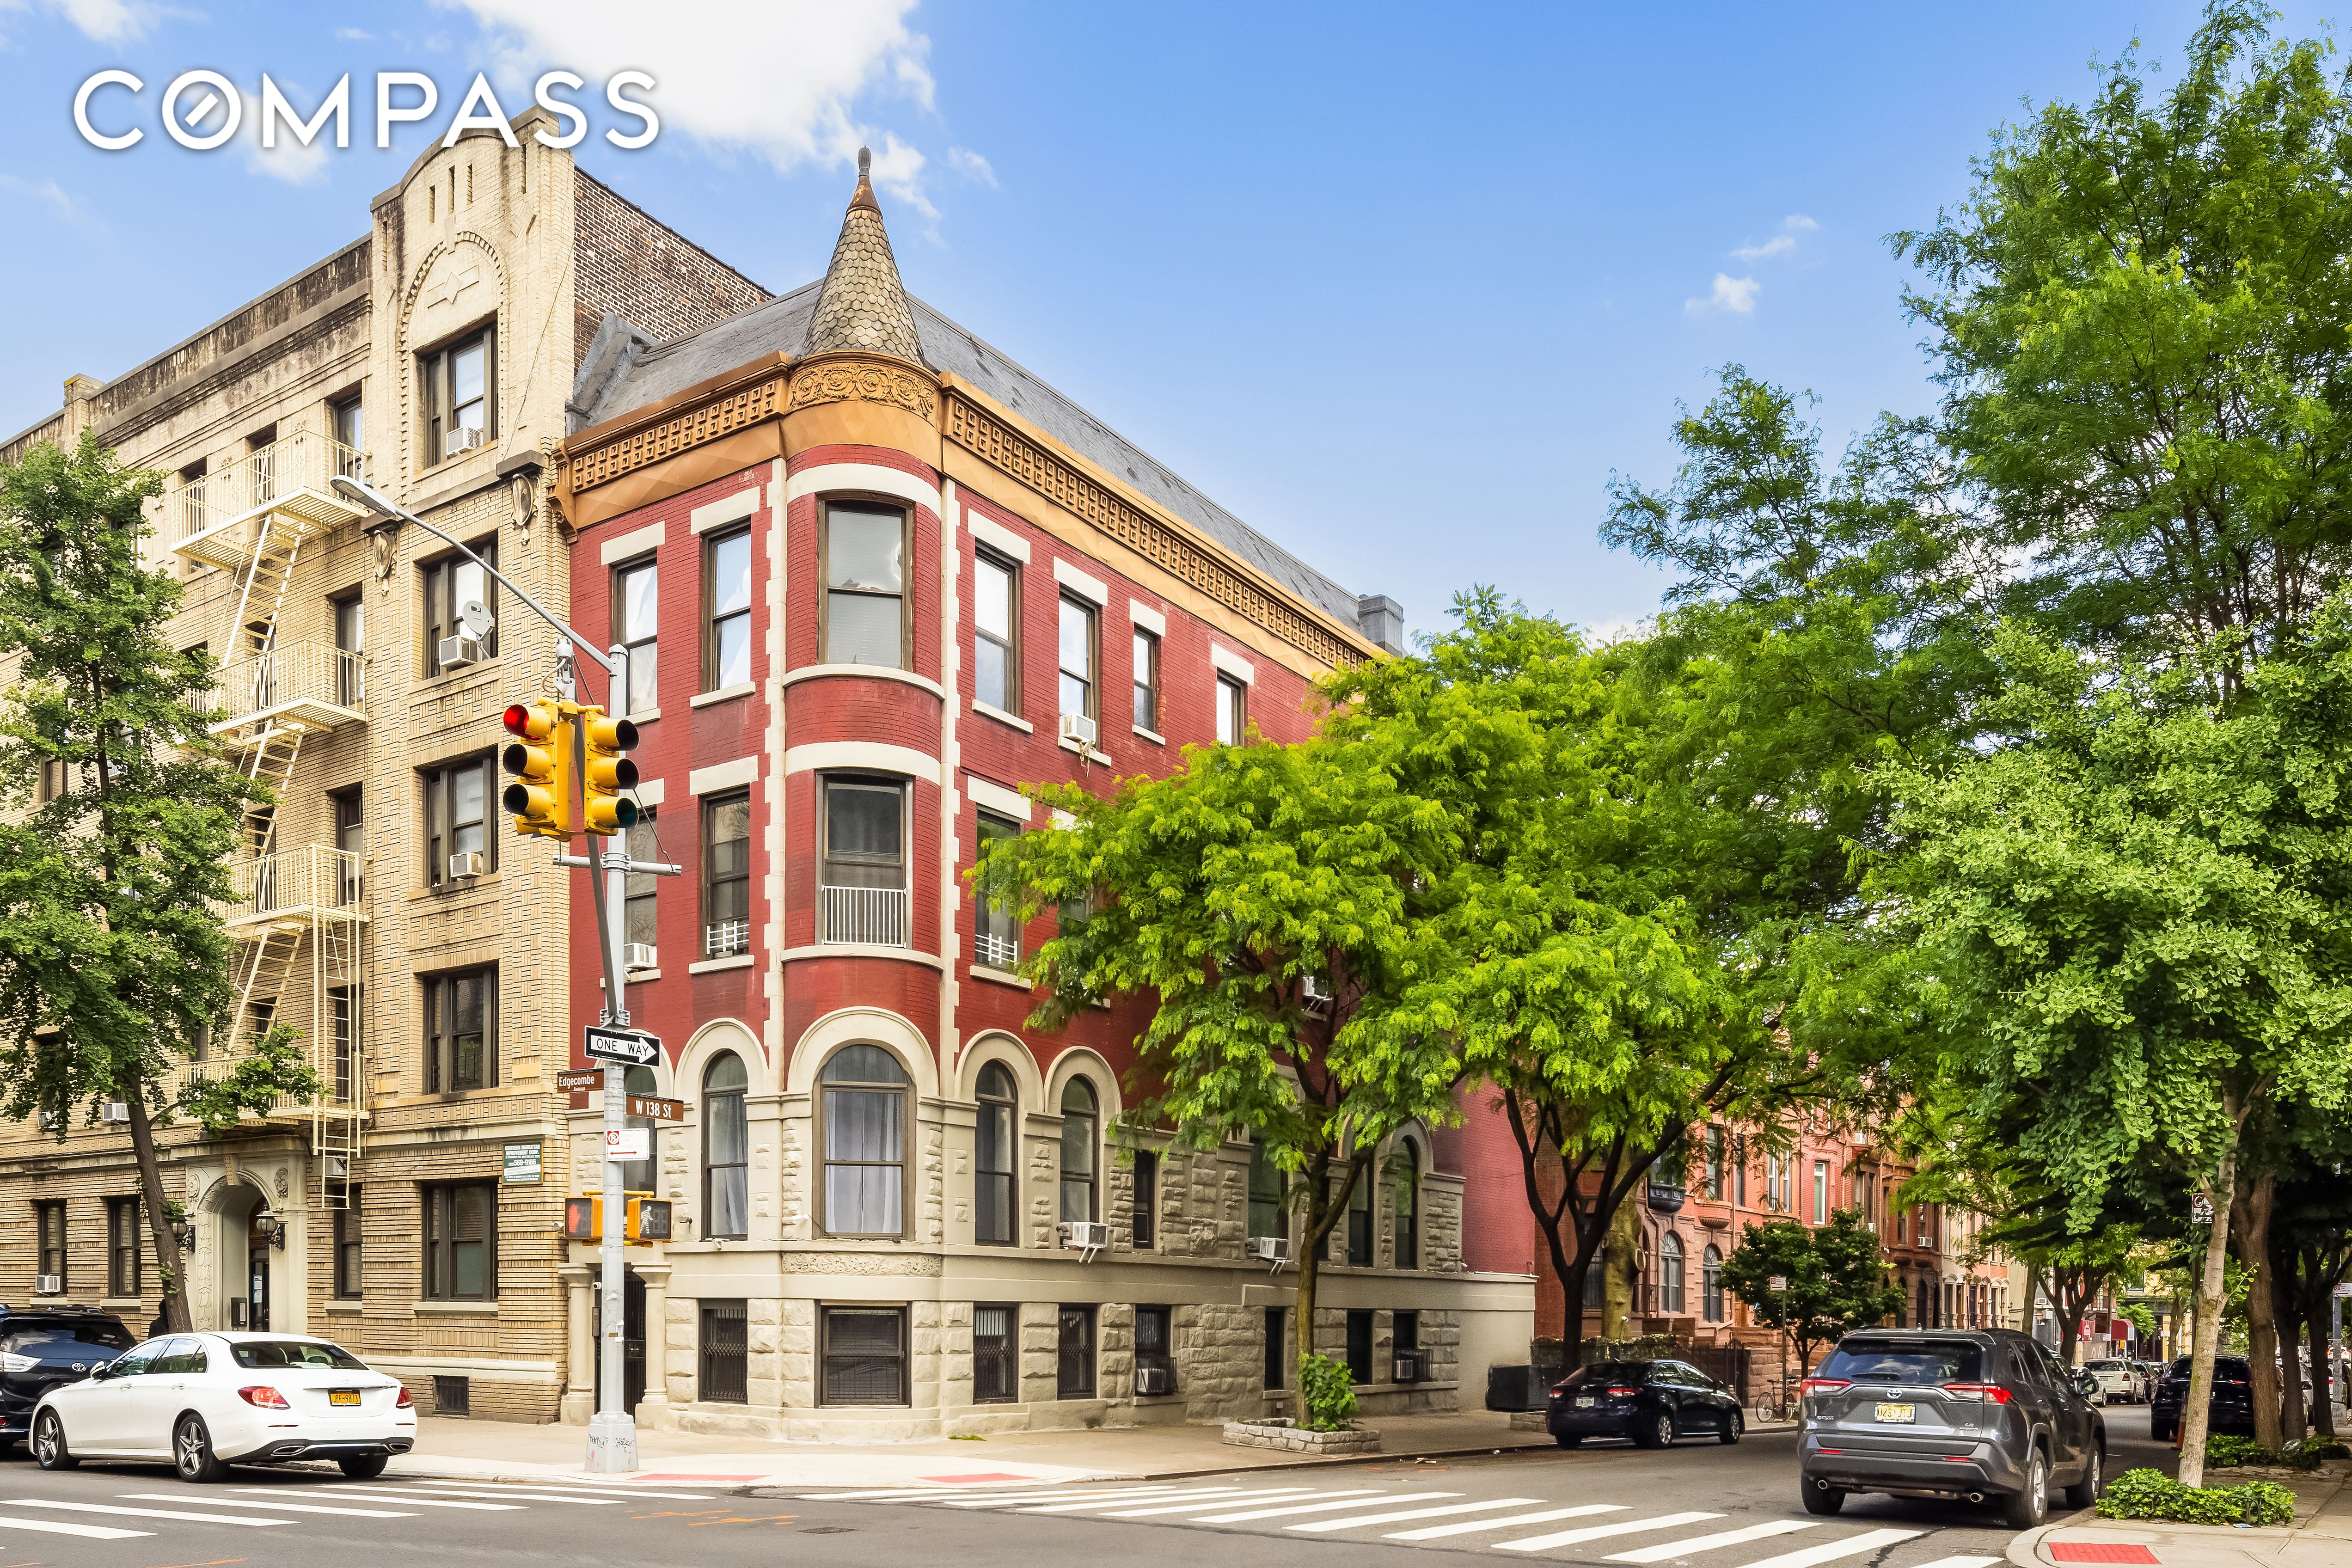 76 Edgecombe Avenue, Central Harlem, Upper Manhattan, NYC - 8 Bedrooms  
4 Bathrooms  
16 Rooms - 